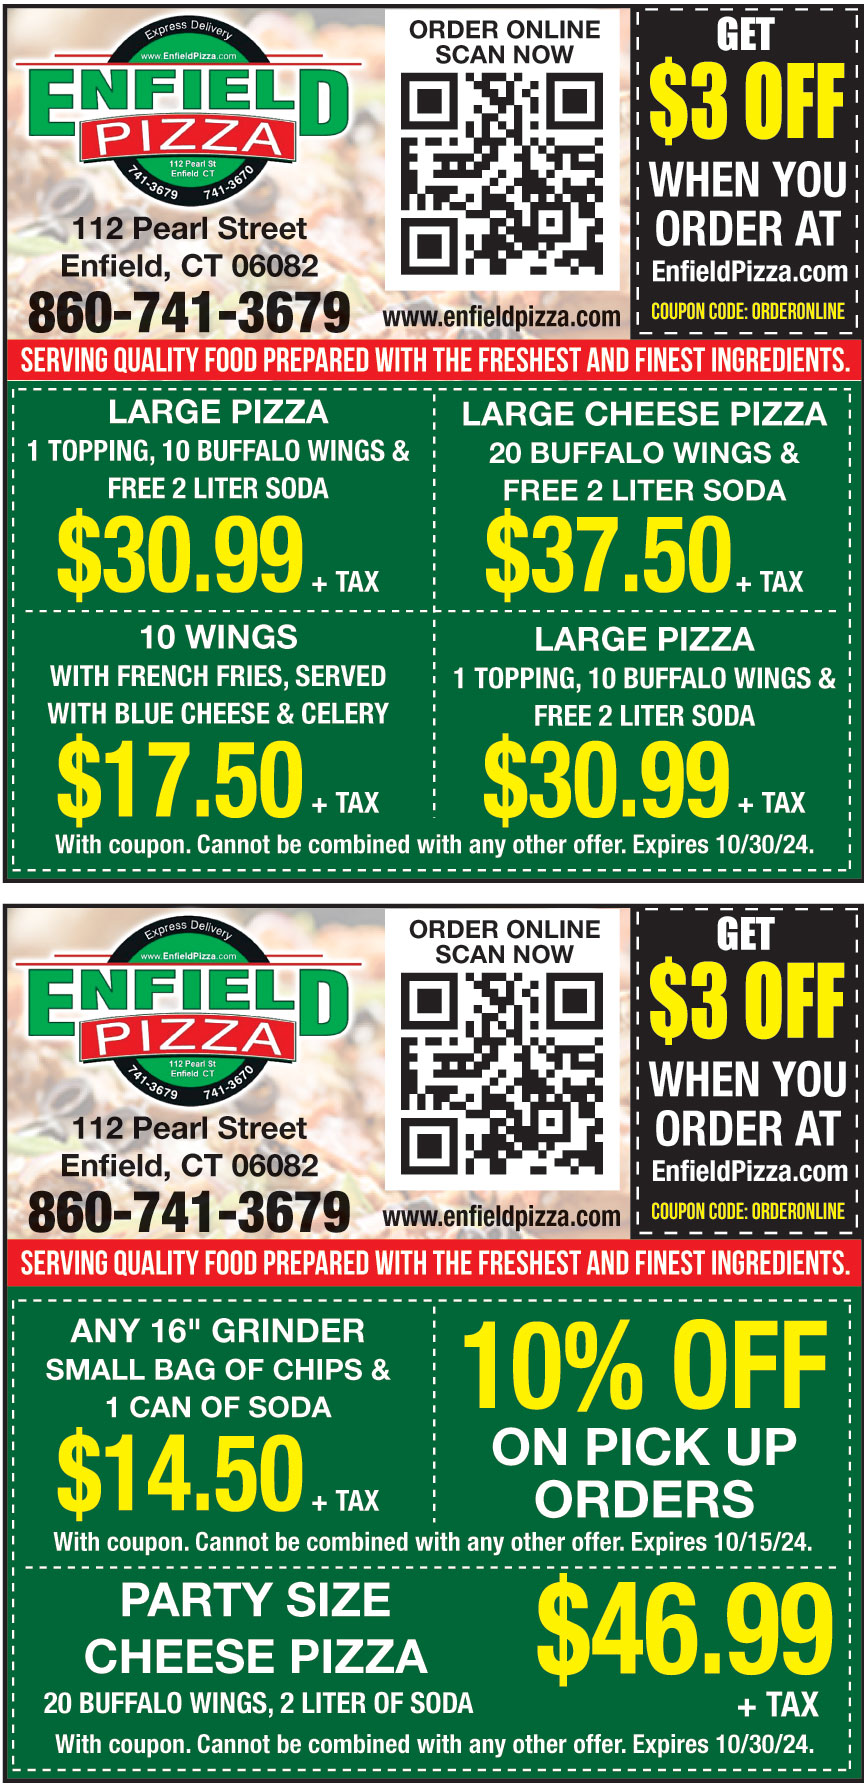 ENFIELD PIZZA